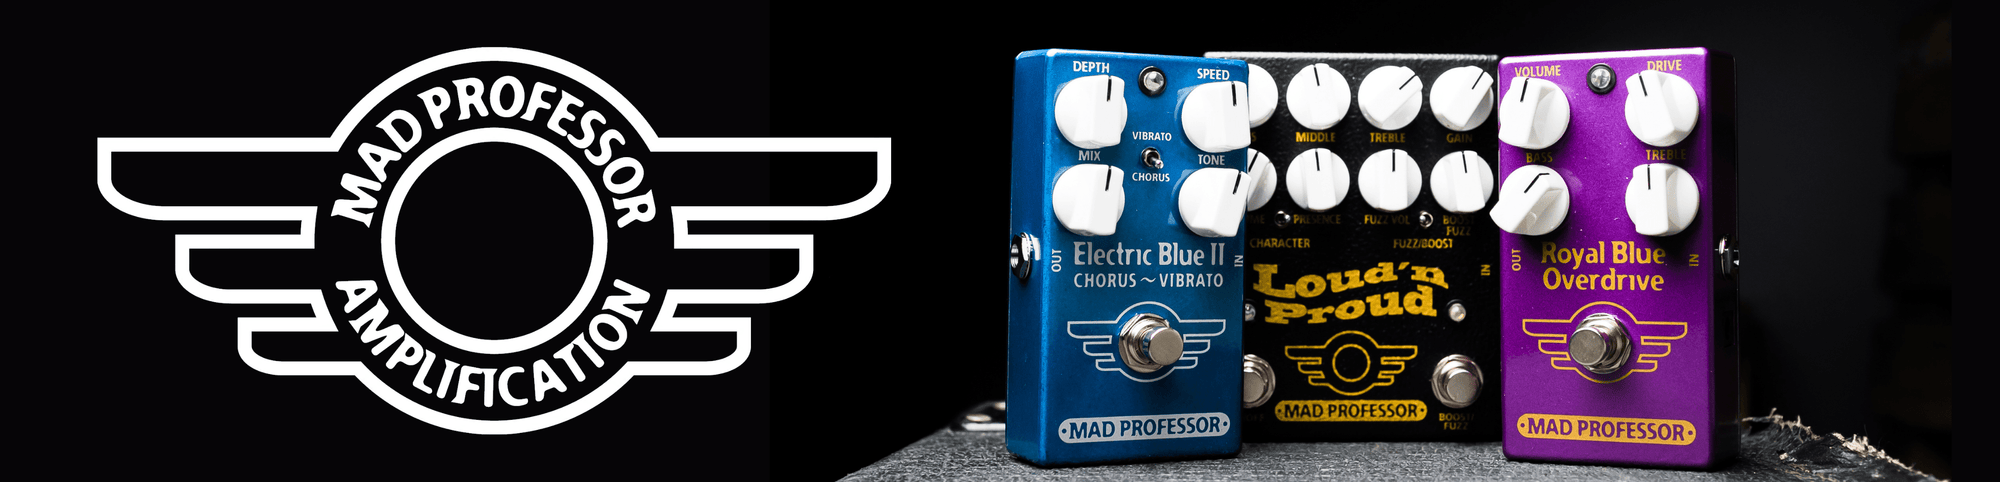 Sky Music welcomes Mad Professor pedals!-Sky Music